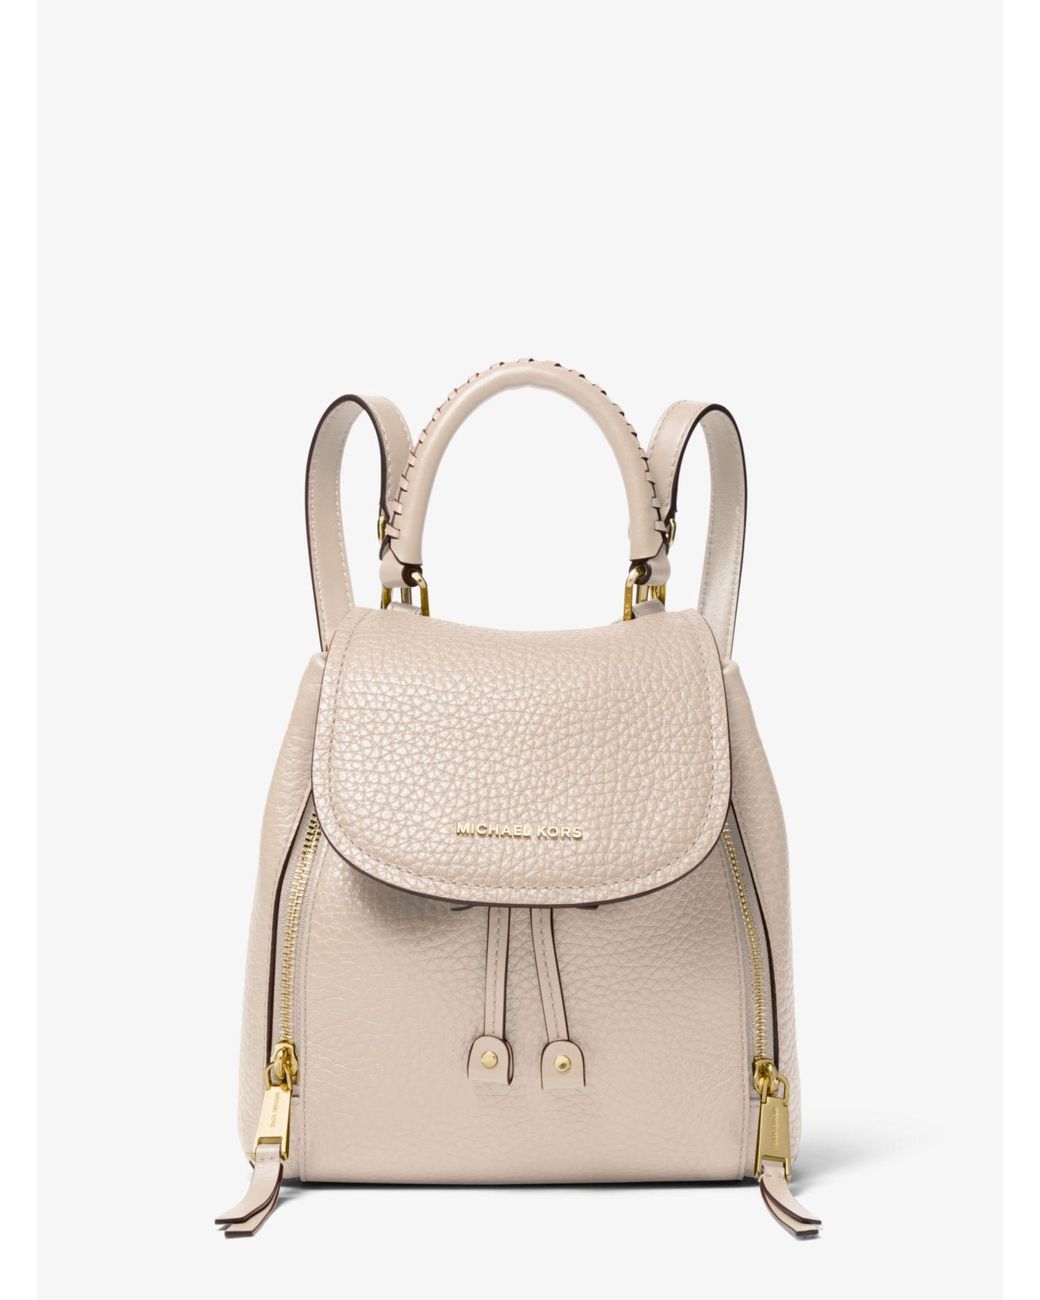 Michael Kors Viv Extra-small Pebbled Leather Backpack in Natural | Lyst  Australia